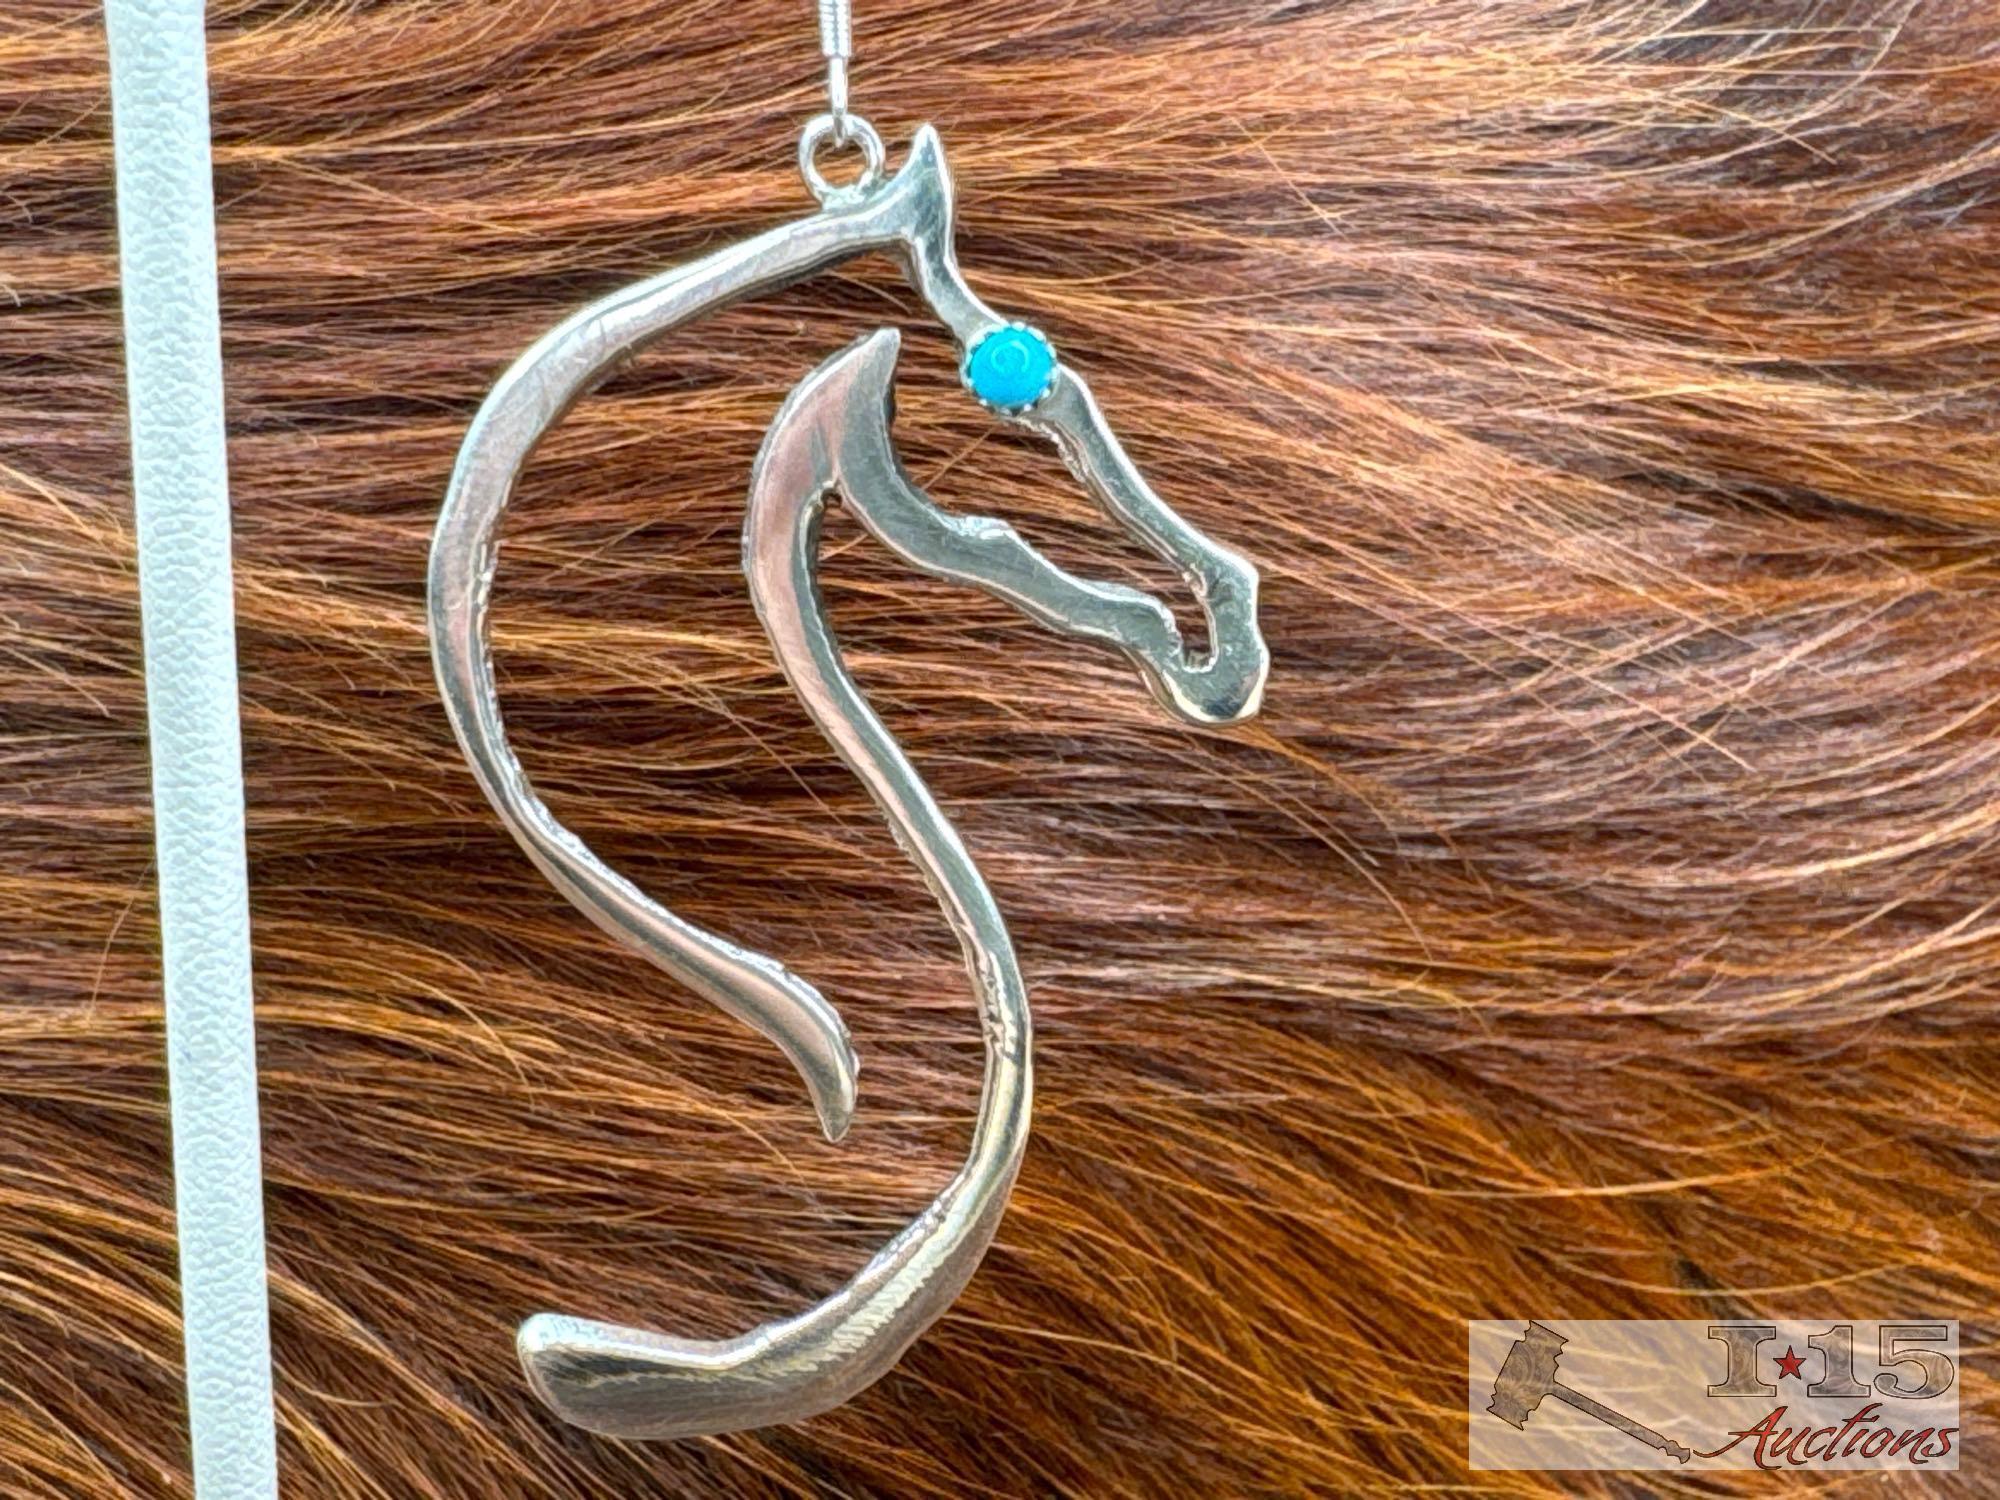 Native American Sterling Silver Horse Earrings with Turquoise Stones, 12g